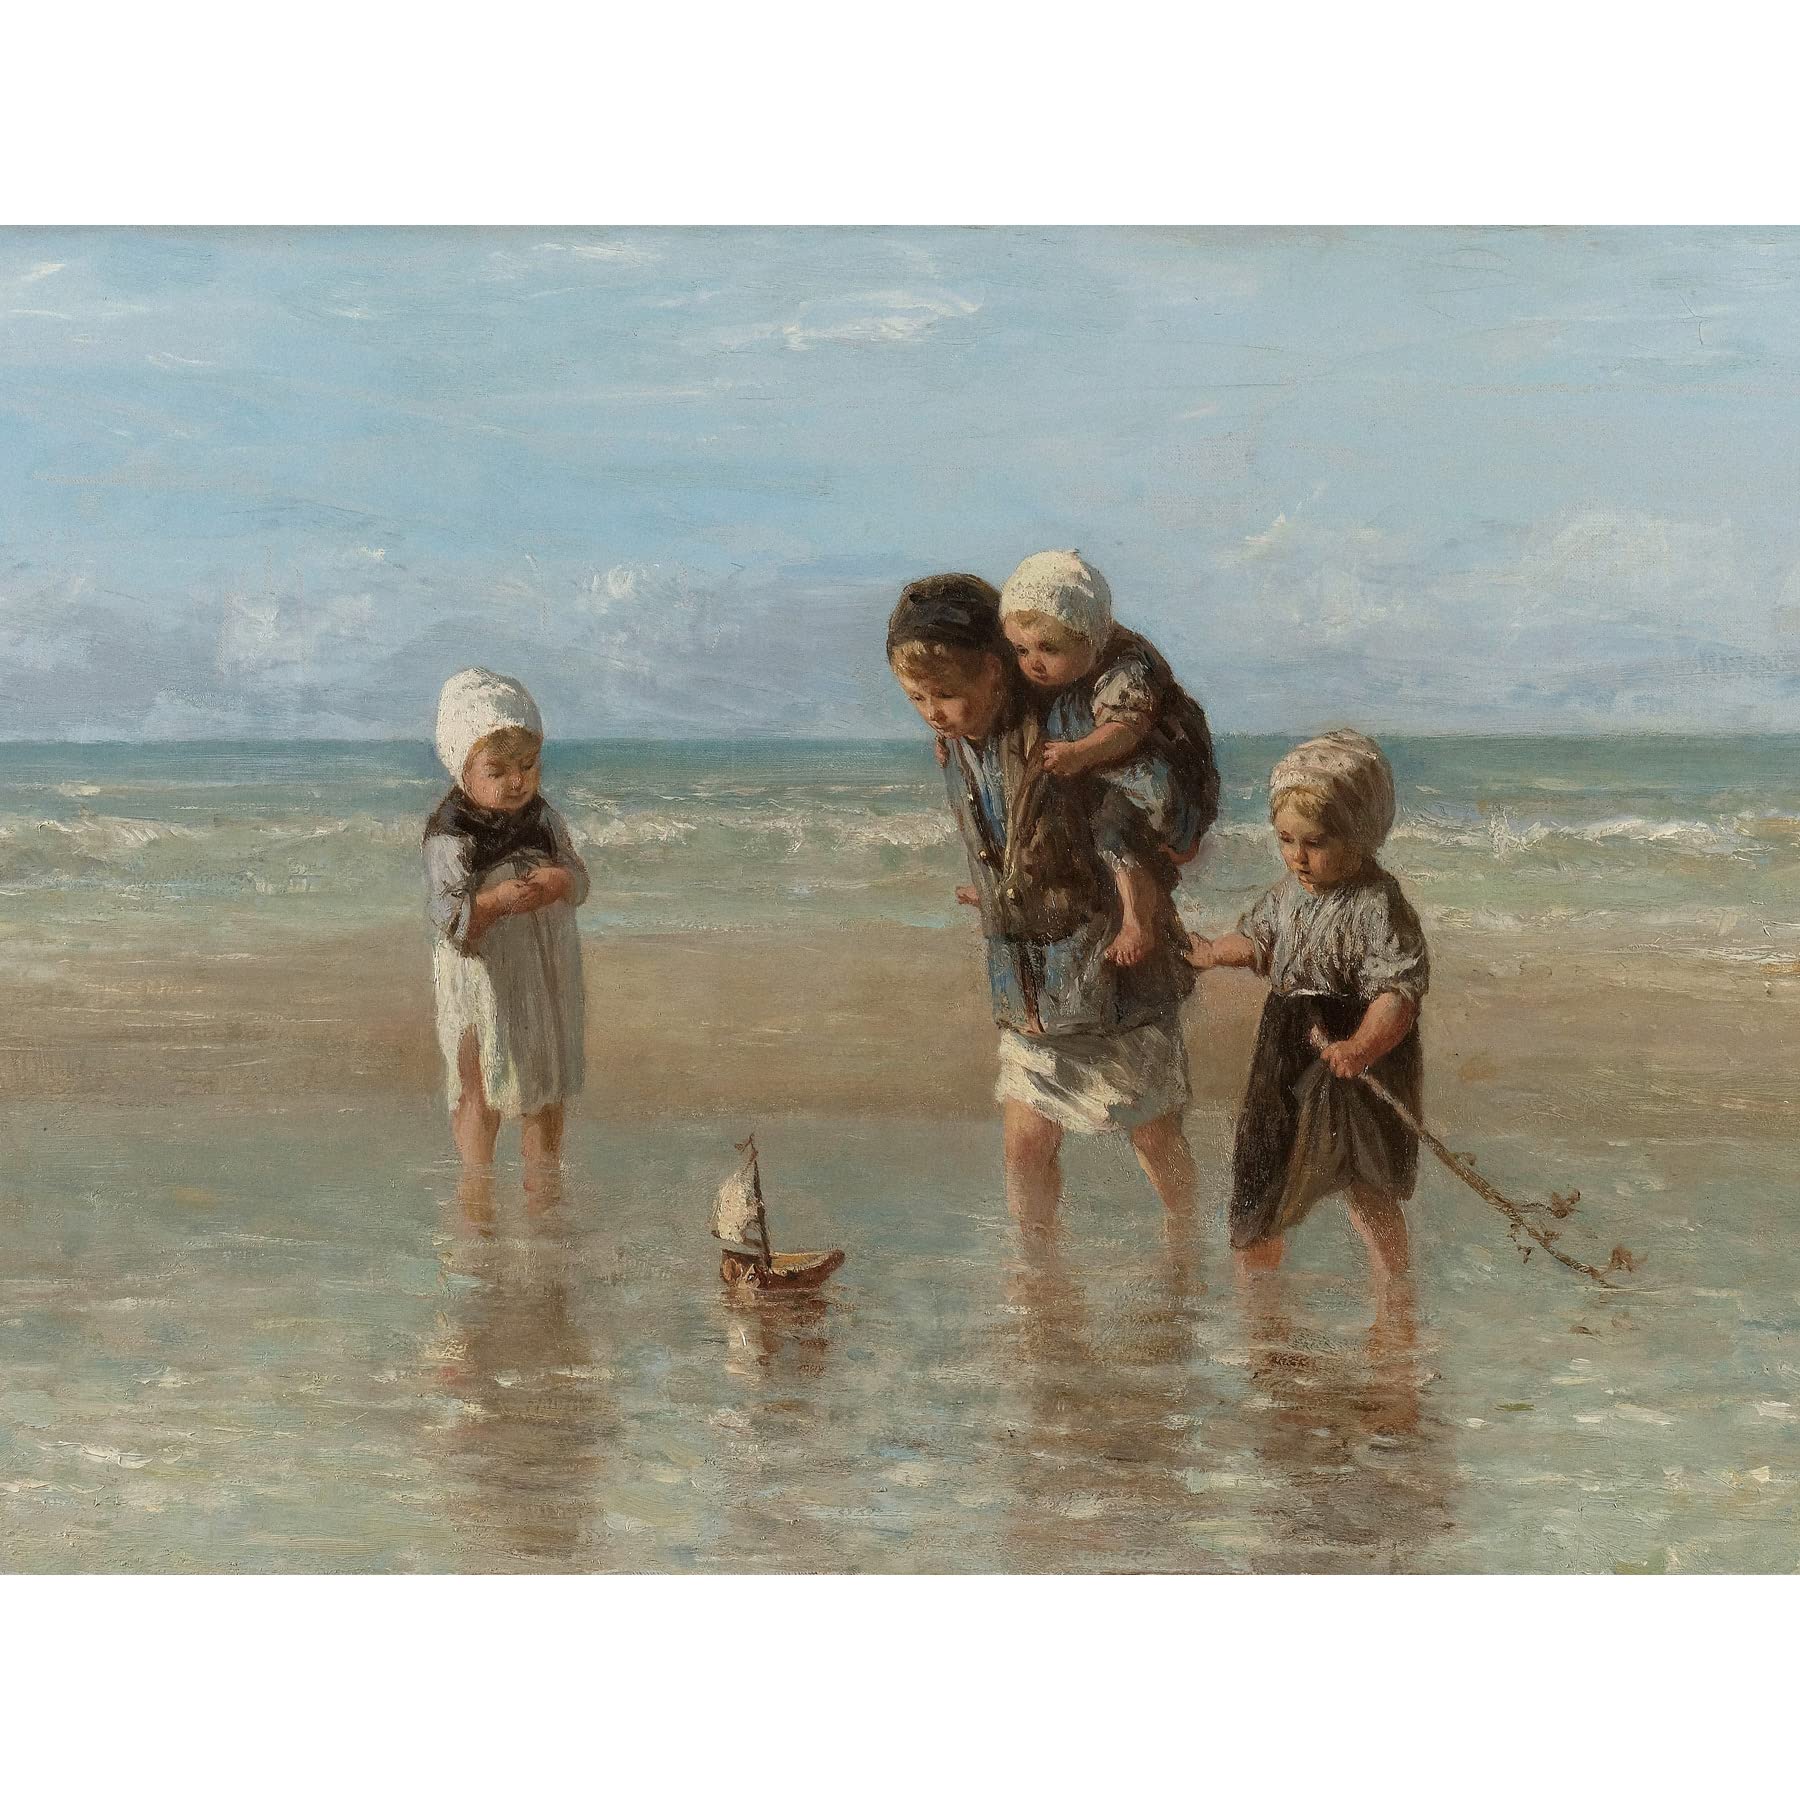 Jozef Israels Children Of The Sea Bathing Painting Large XL Wall Art Canvas Print Kinder Gemälde Wand